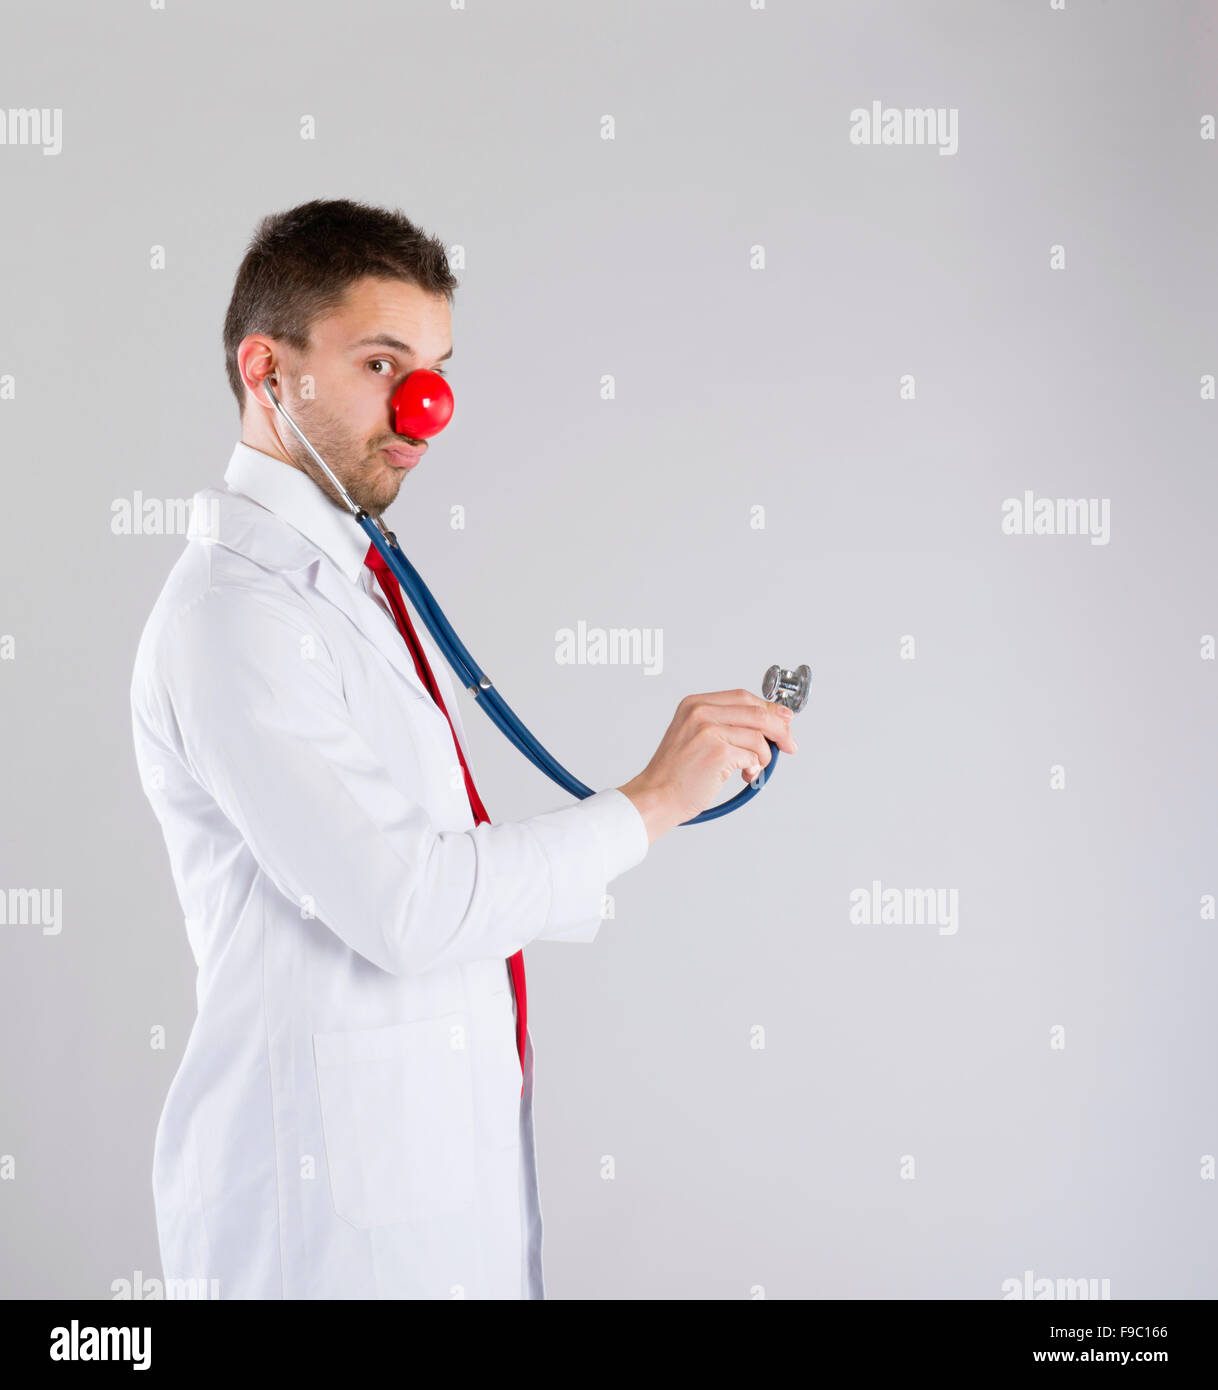 Portrait of funny doctor with red nose Stock Photo